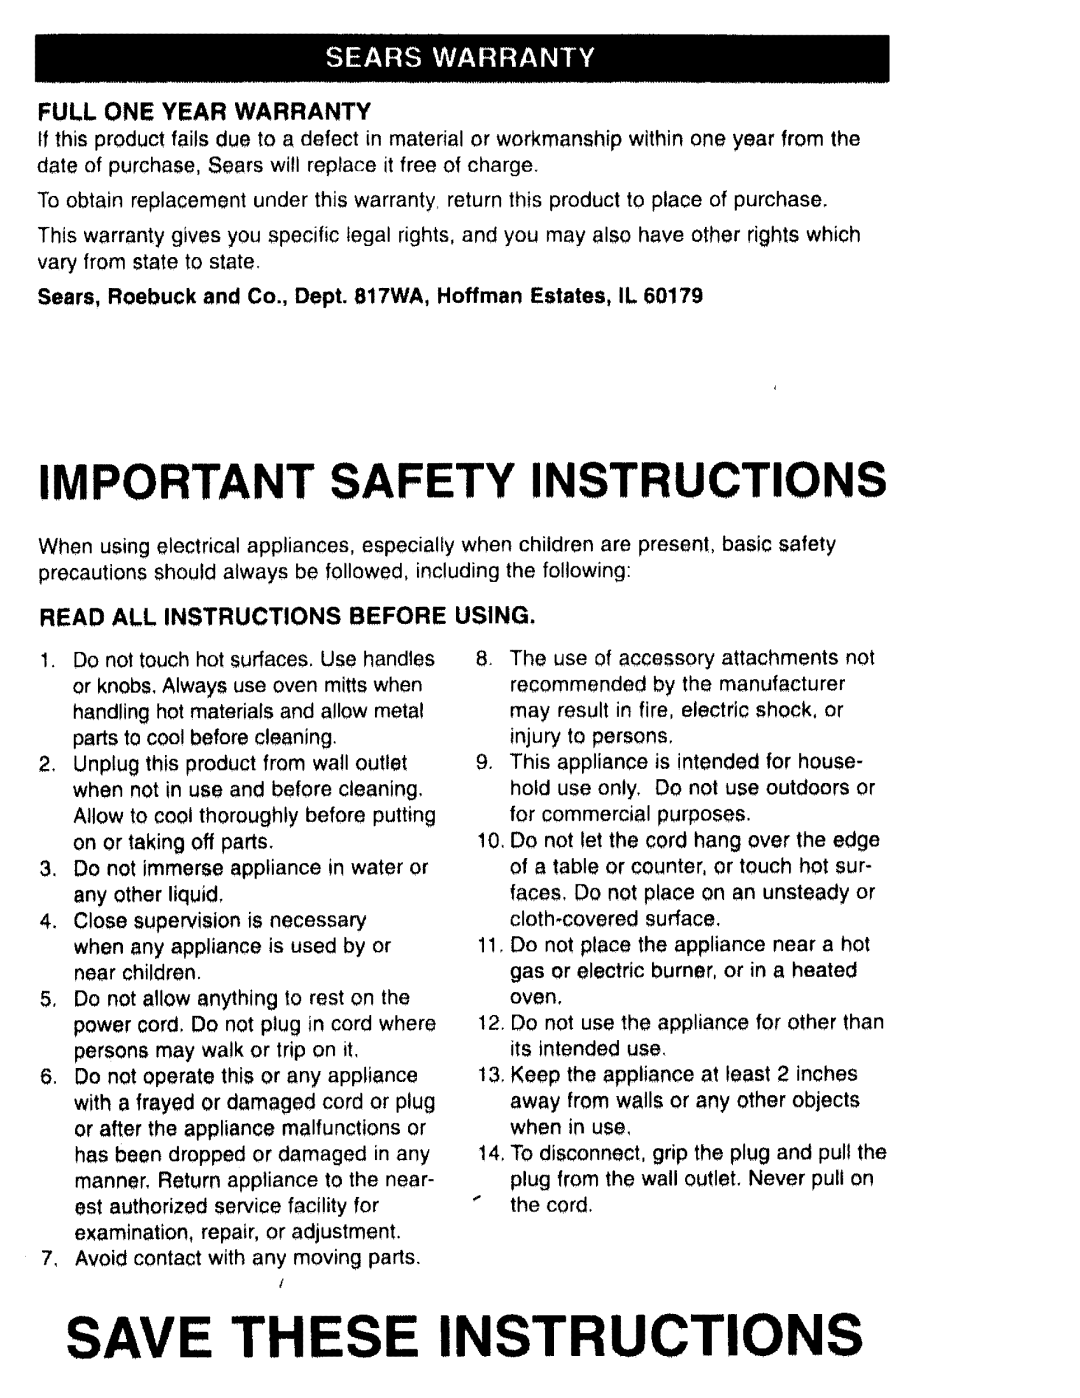 Kenmore 48487 manual SAVE tHESE INSIRUCIONS, IMPORTANT SAFETY INSrRUCTIONS 